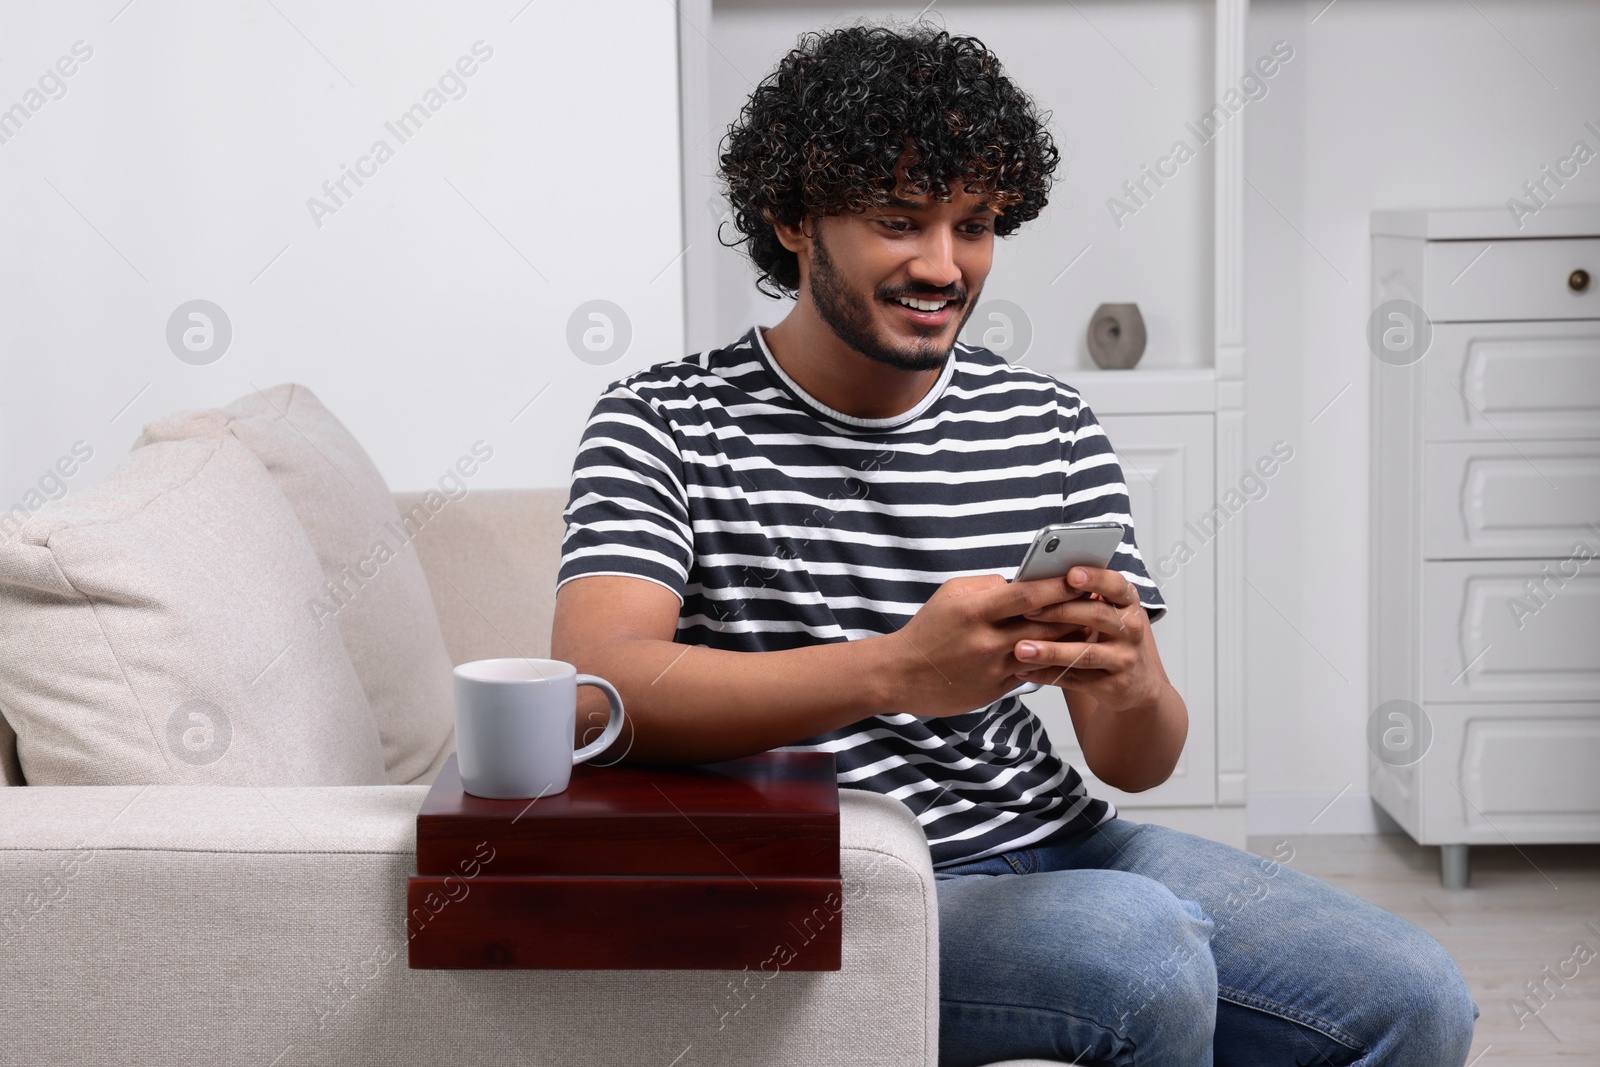 Photo of Happy man using smartphone on sofa with wooden armrest table at home